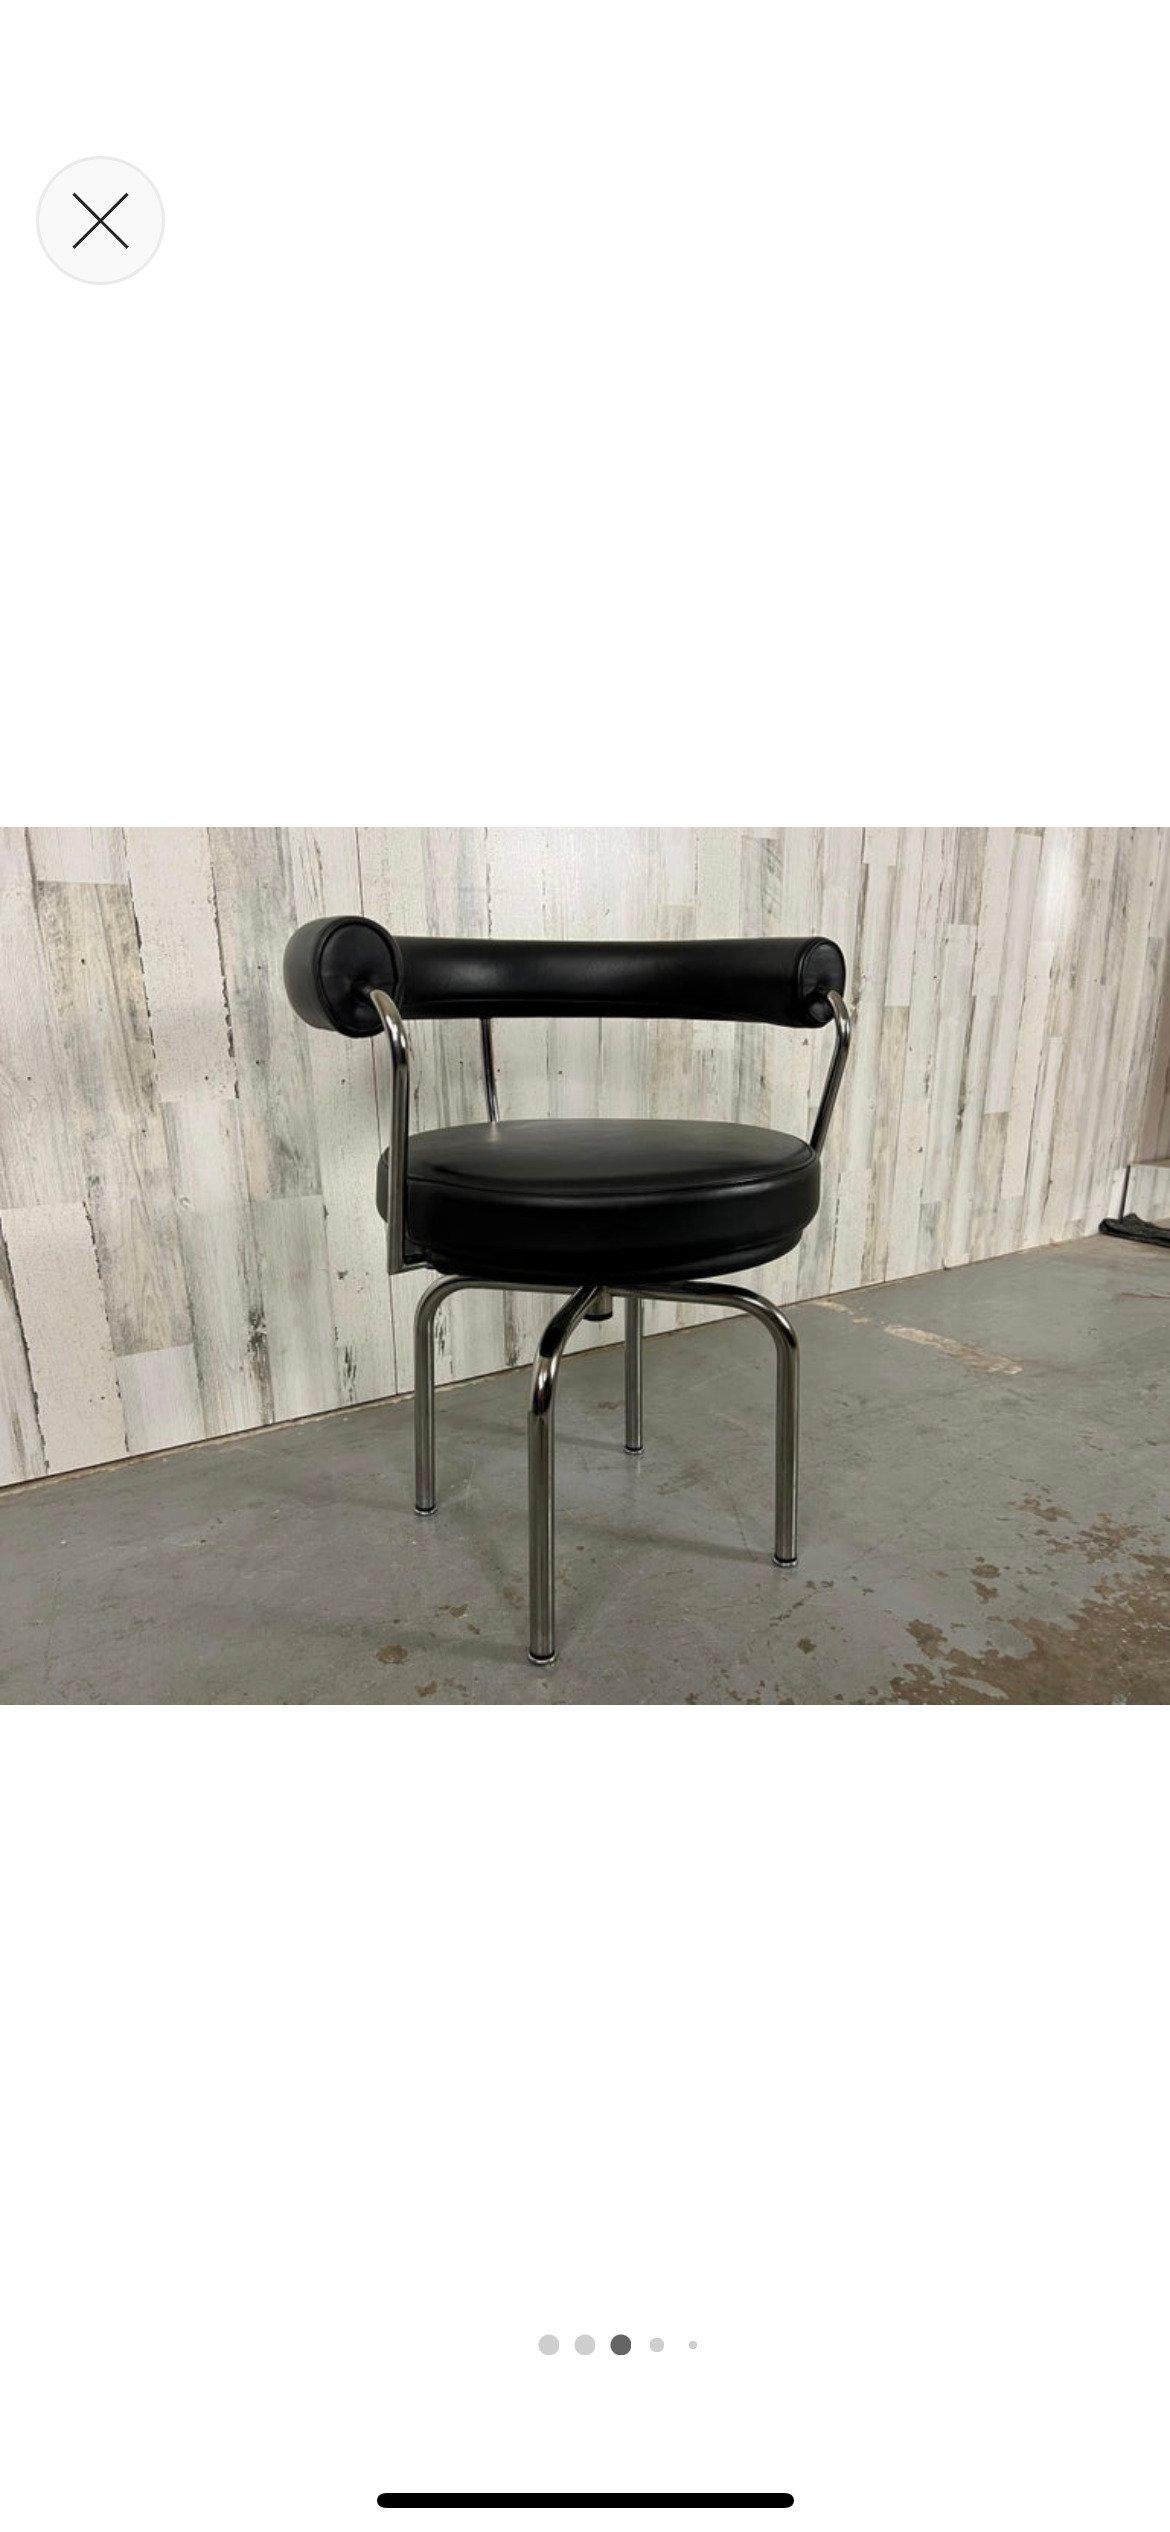 Beautiful Italian leather with Cassina quality chrome makes this chair a great accent for any room.